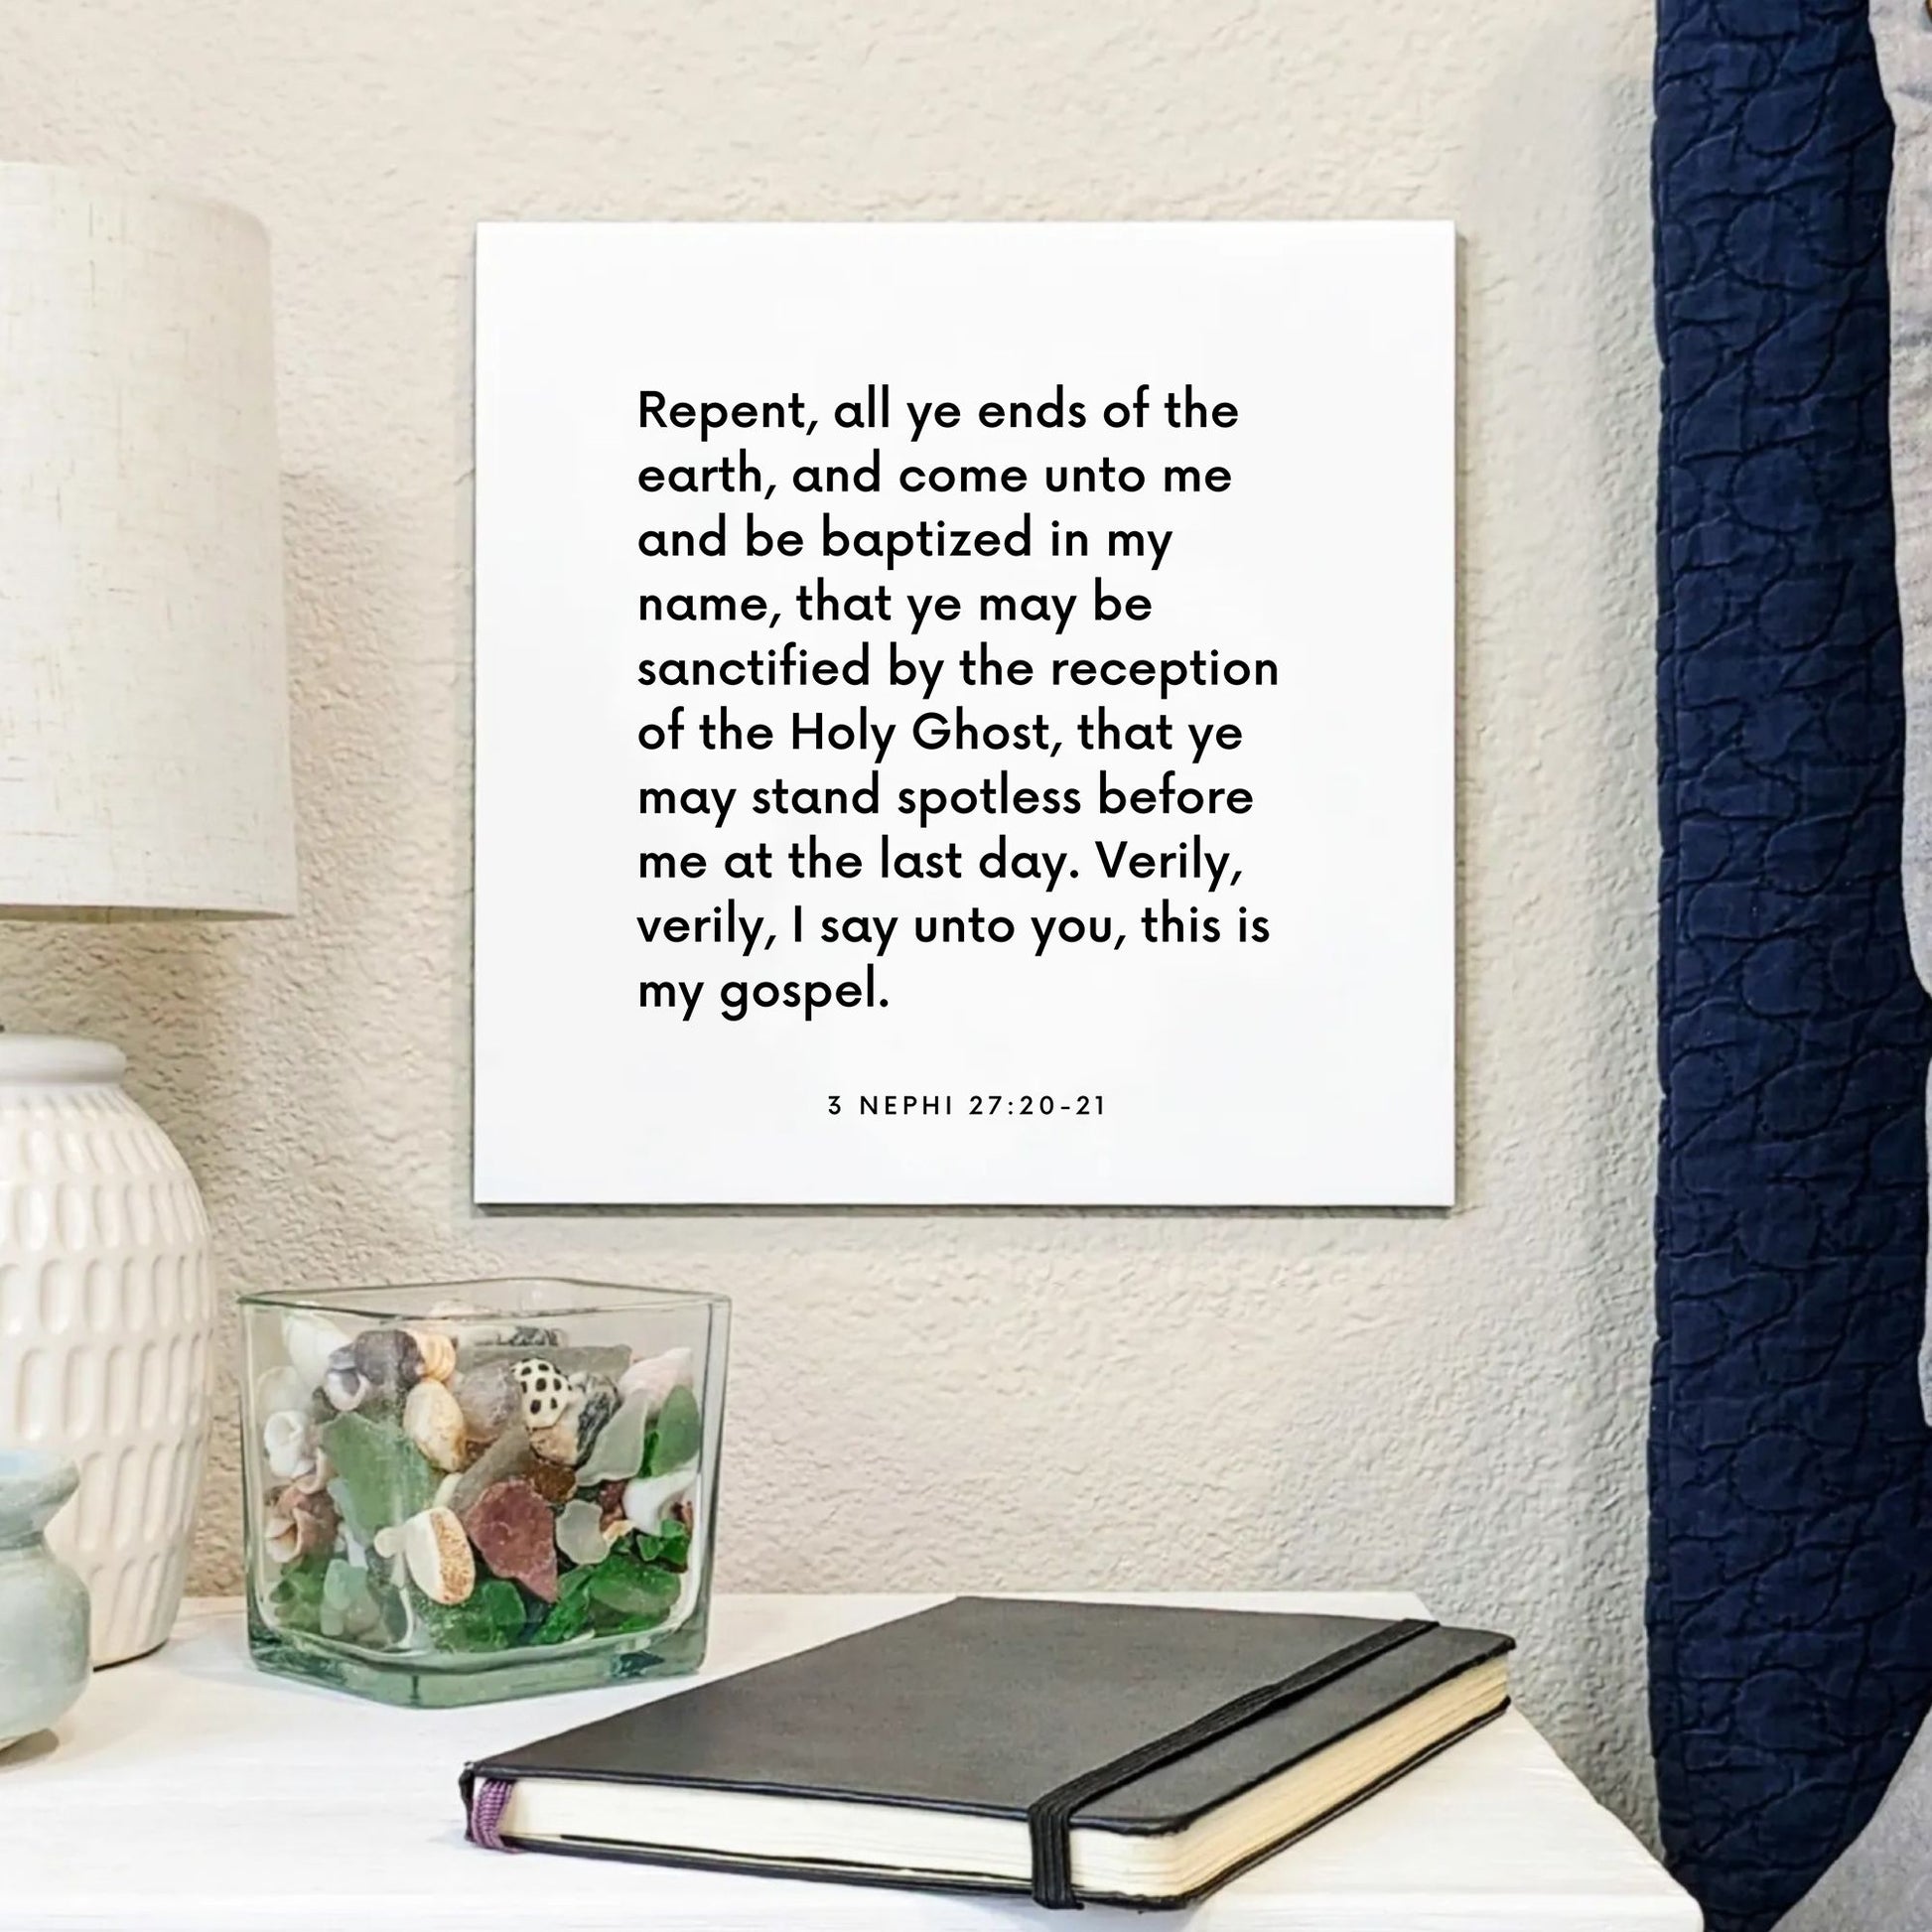 Bedside mouting of the scripture tile for 3 Nephi 27:20-21 - "Repent, all ye ends of the earth, and come unto me"